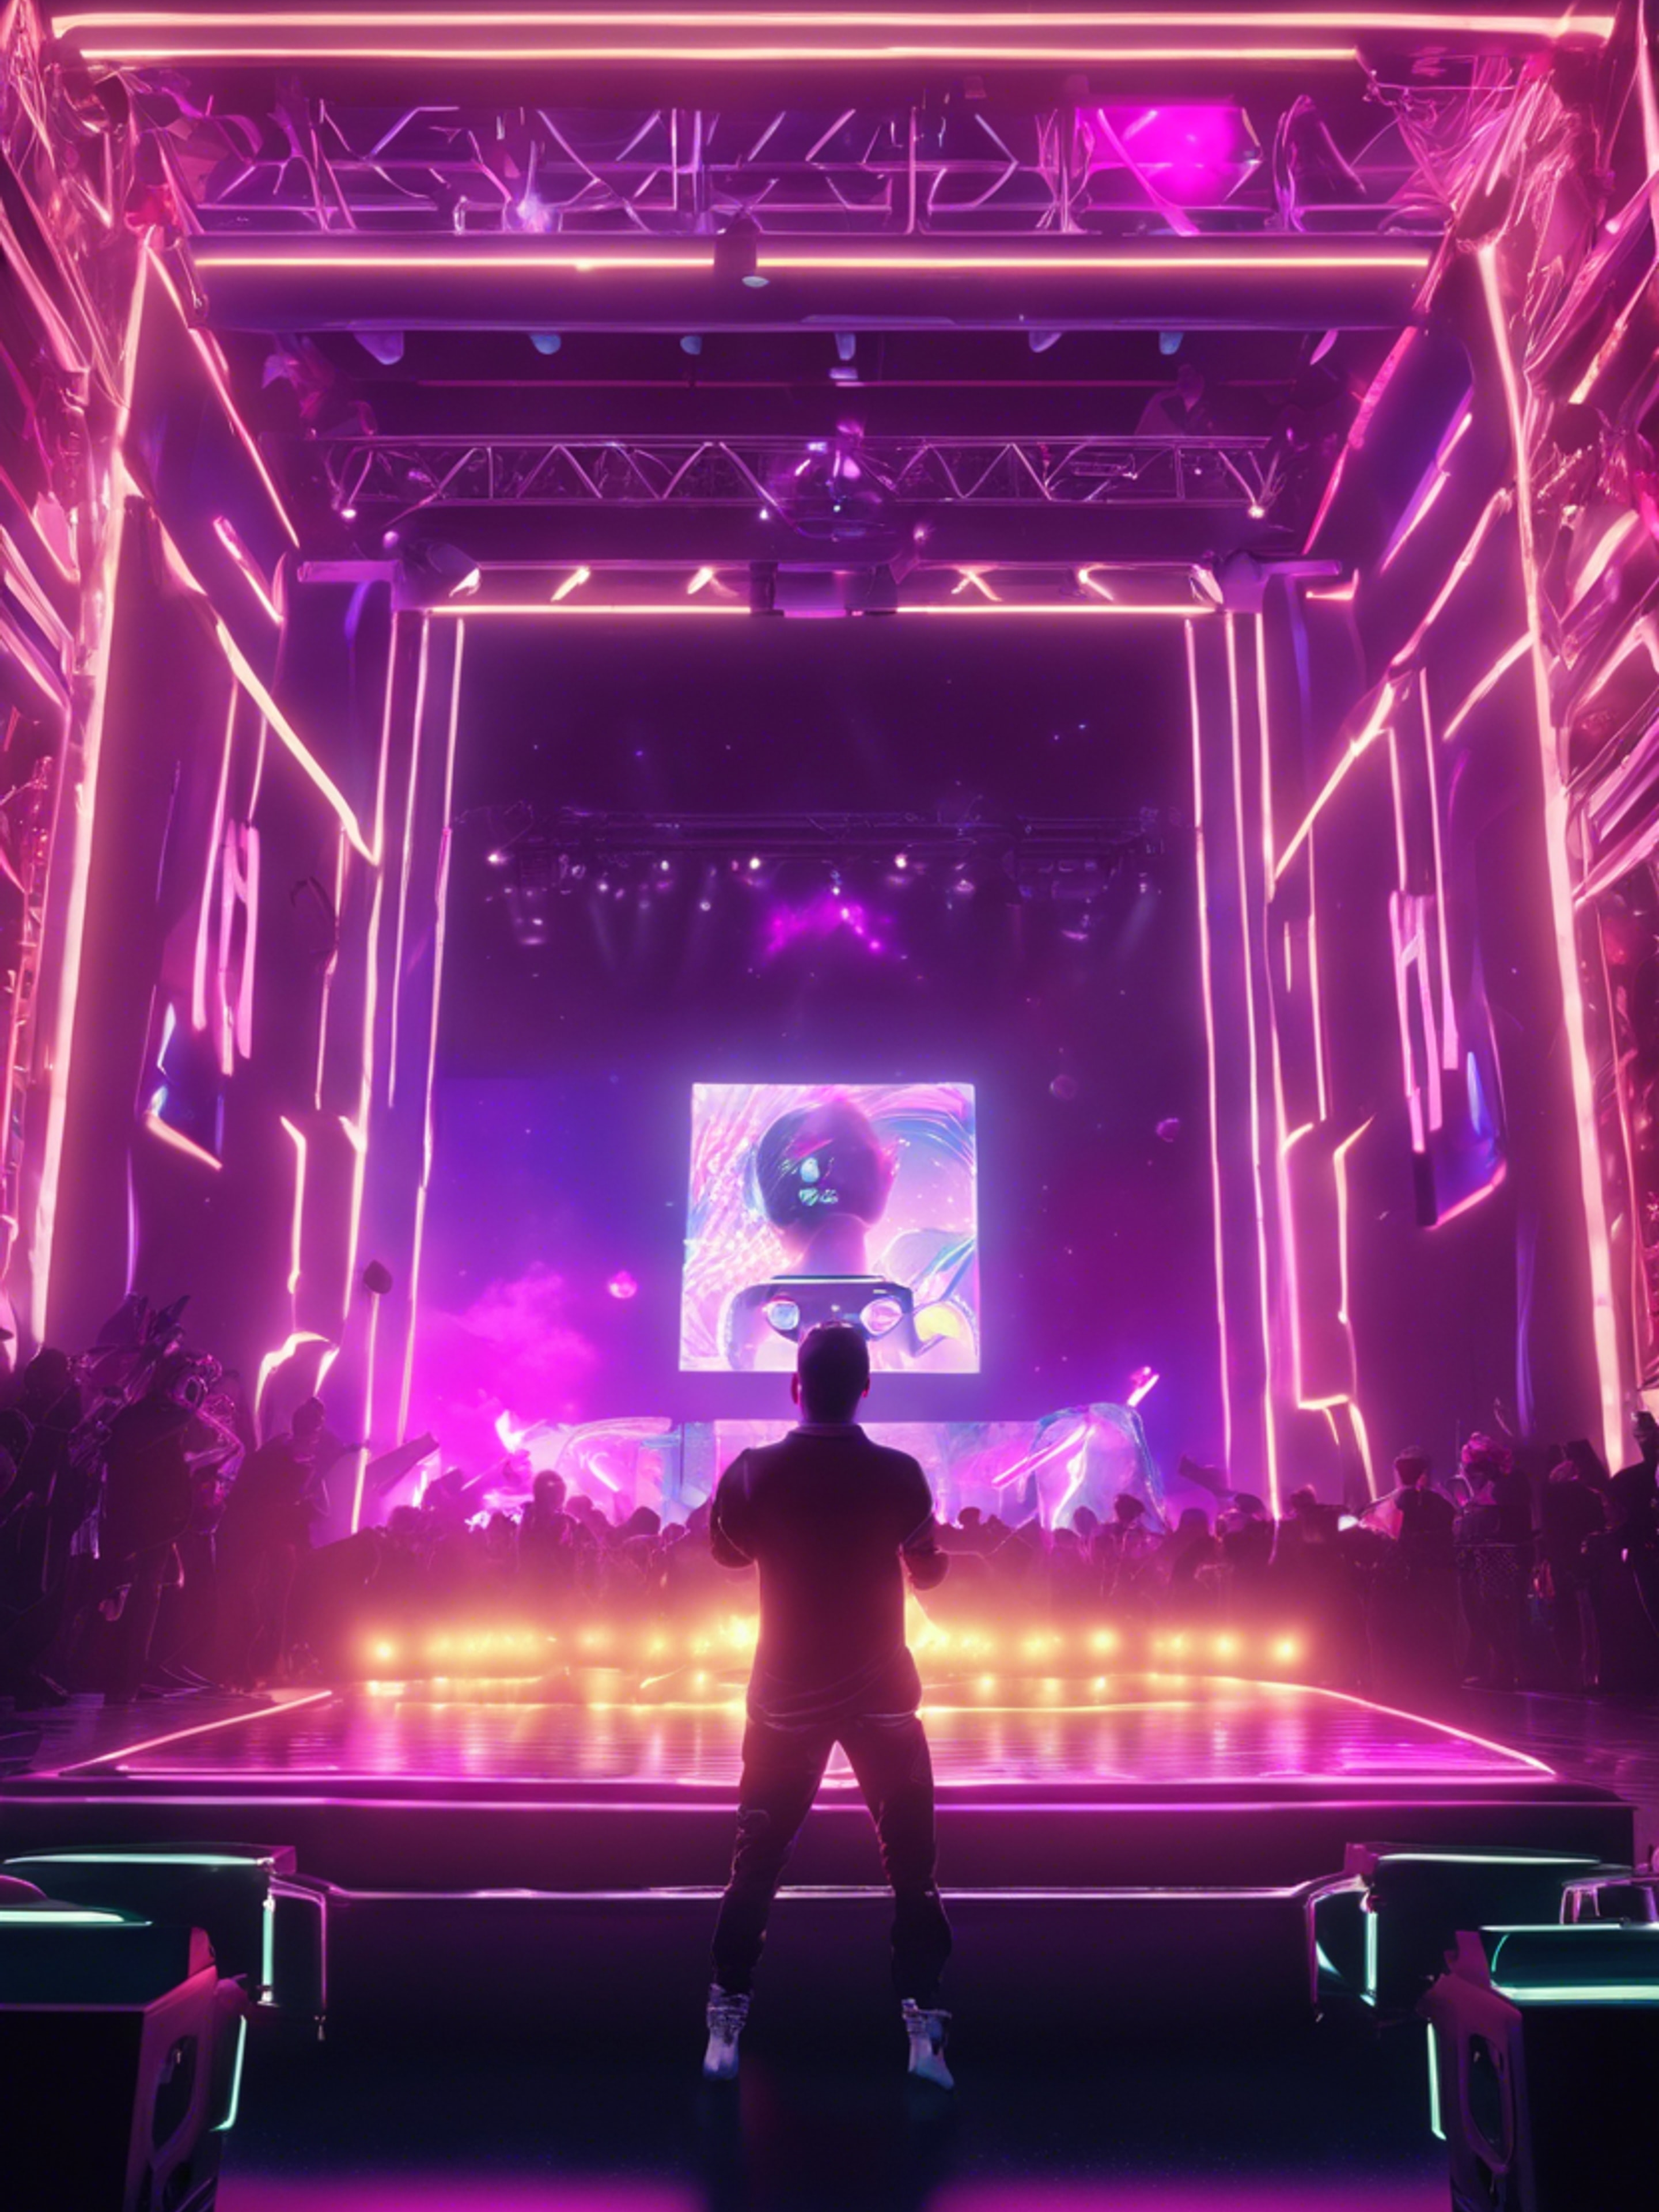 A virtual concert in a Y2K gaming environment, with neon spotlights showcasing a digital avatar performing onstage.壁紙[570c0802add746f5a0b1]